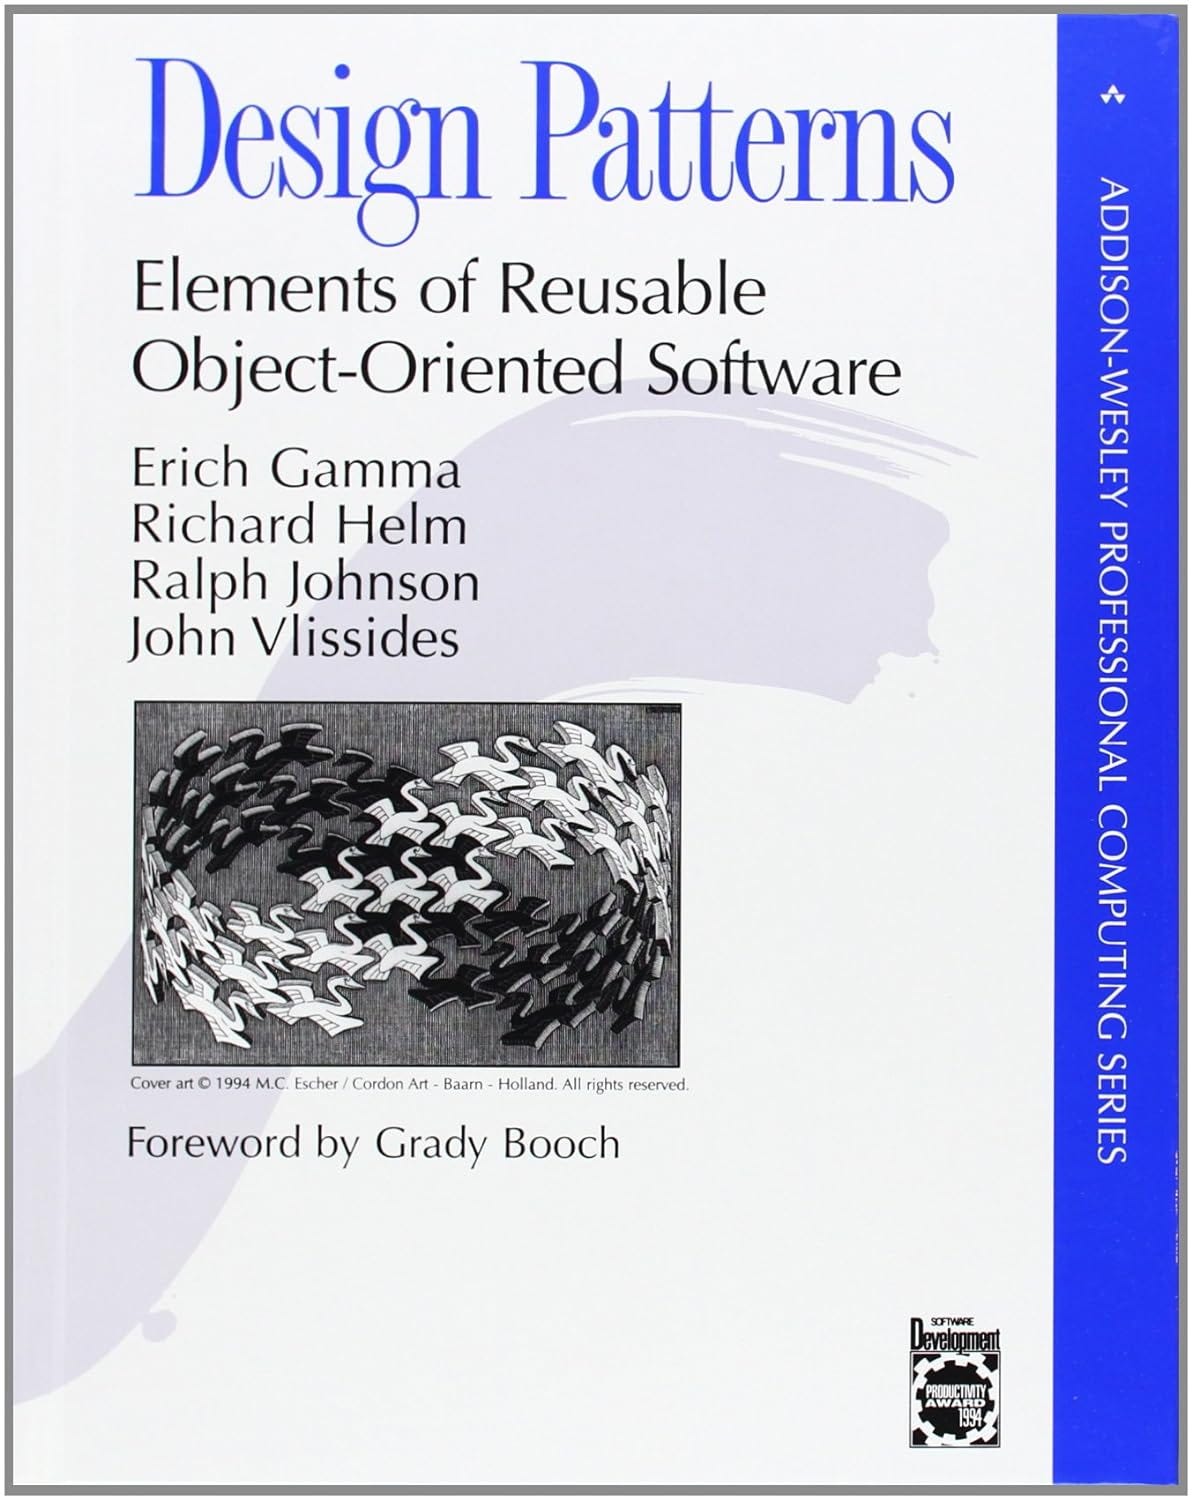 Book cover of Design Patterns: Elements of Reusable Object-Oriented Software by Erich Gamma et al.